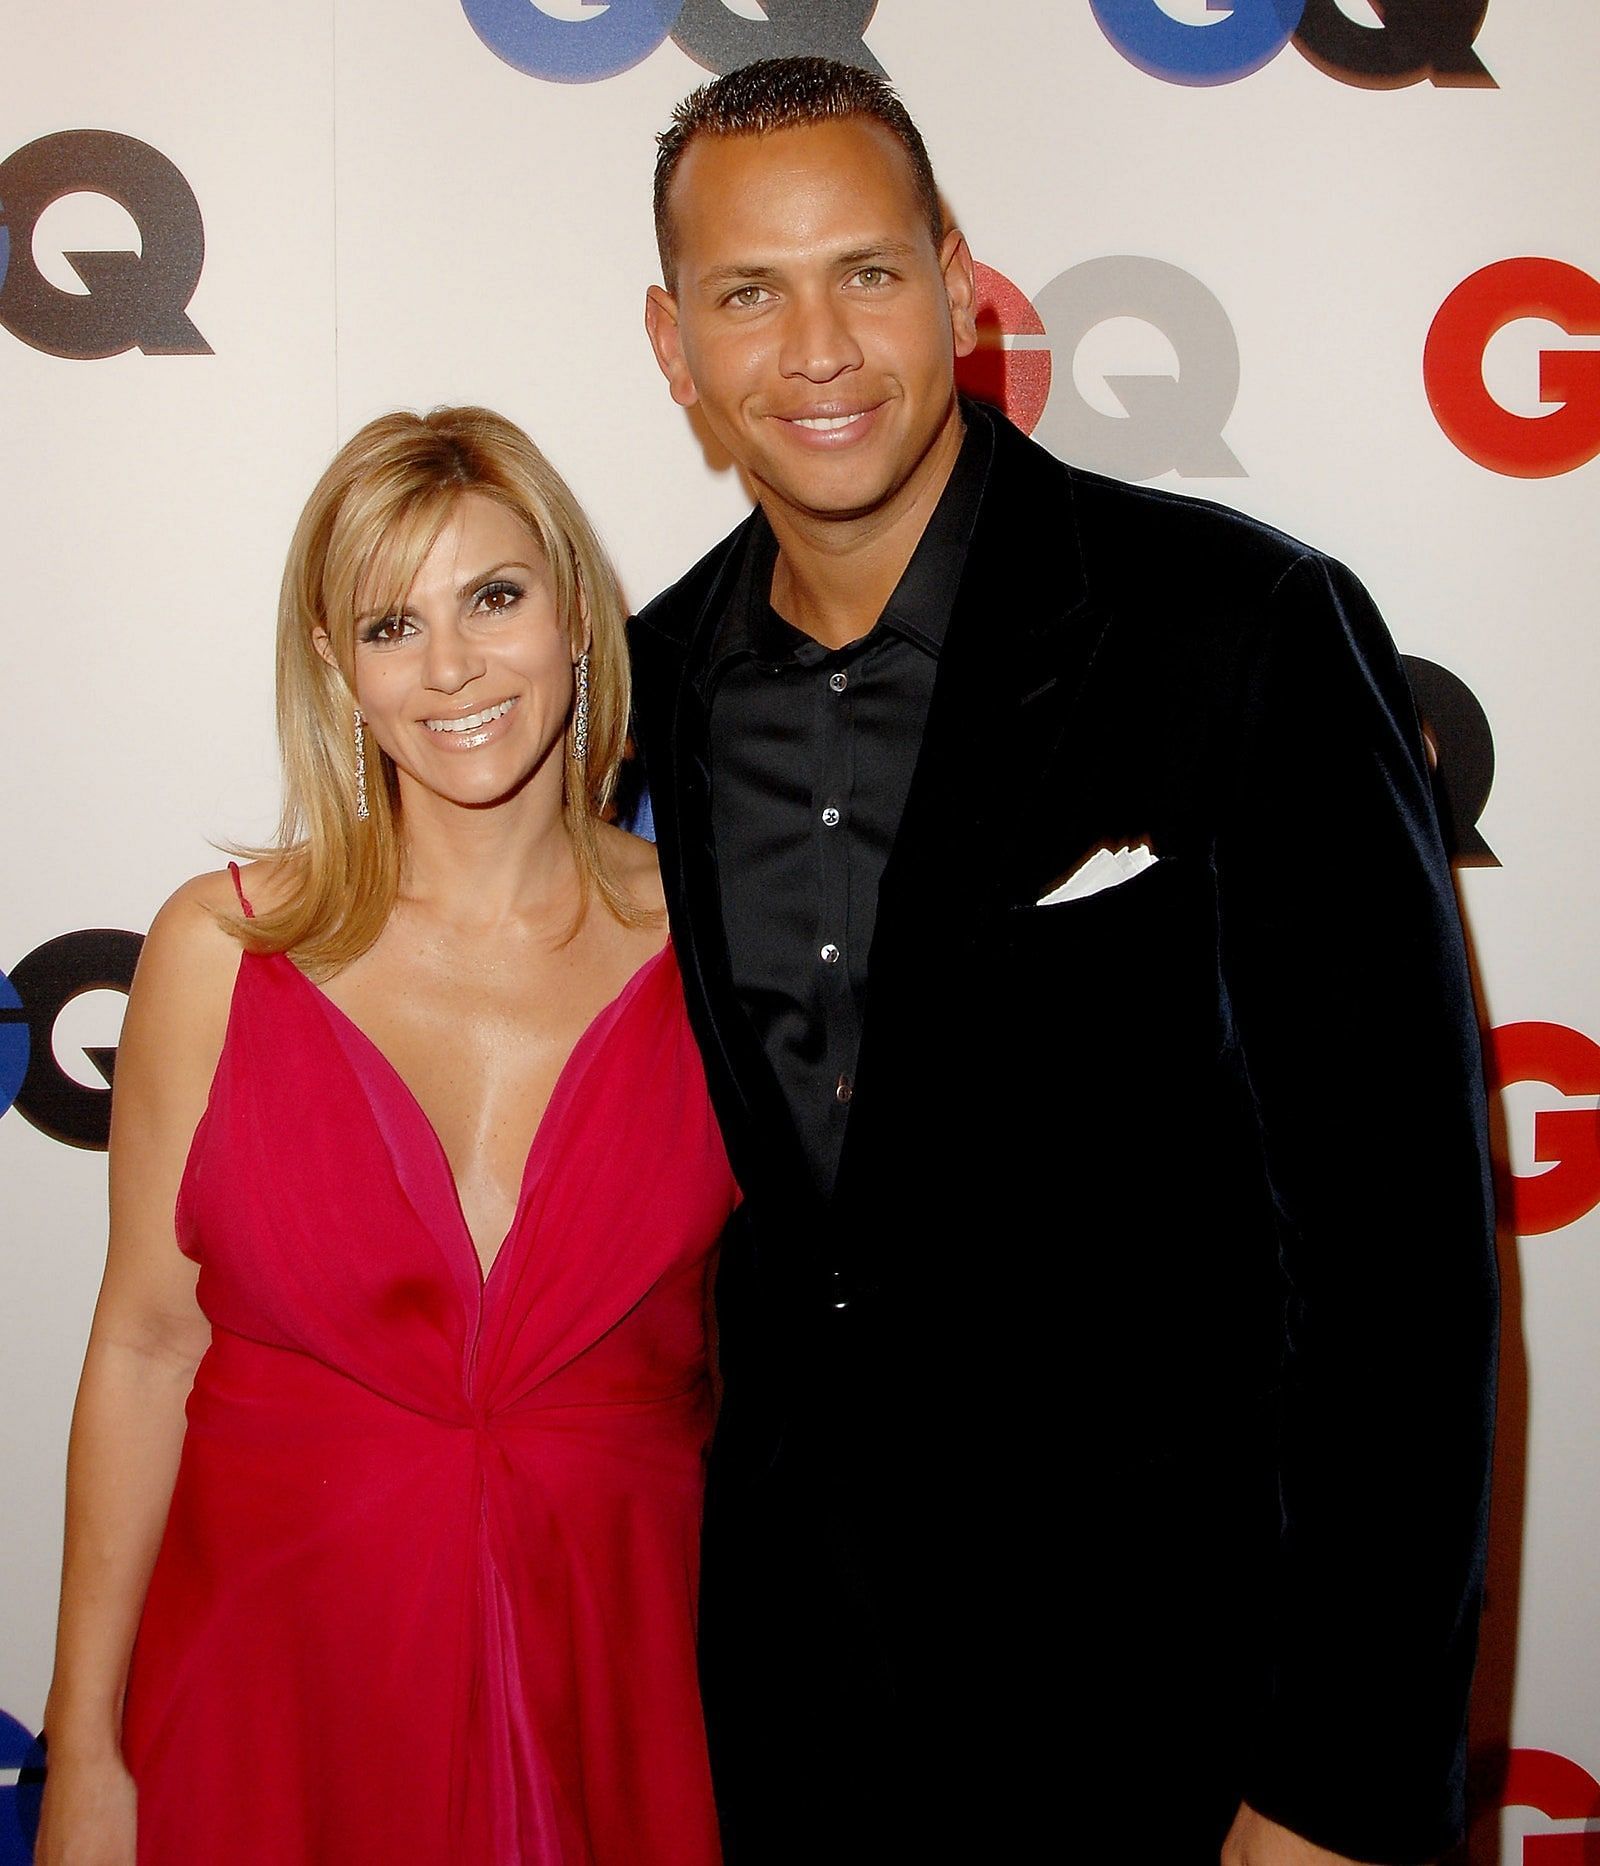 Rodriguez with his ex-wife Cynthia Scurtis.